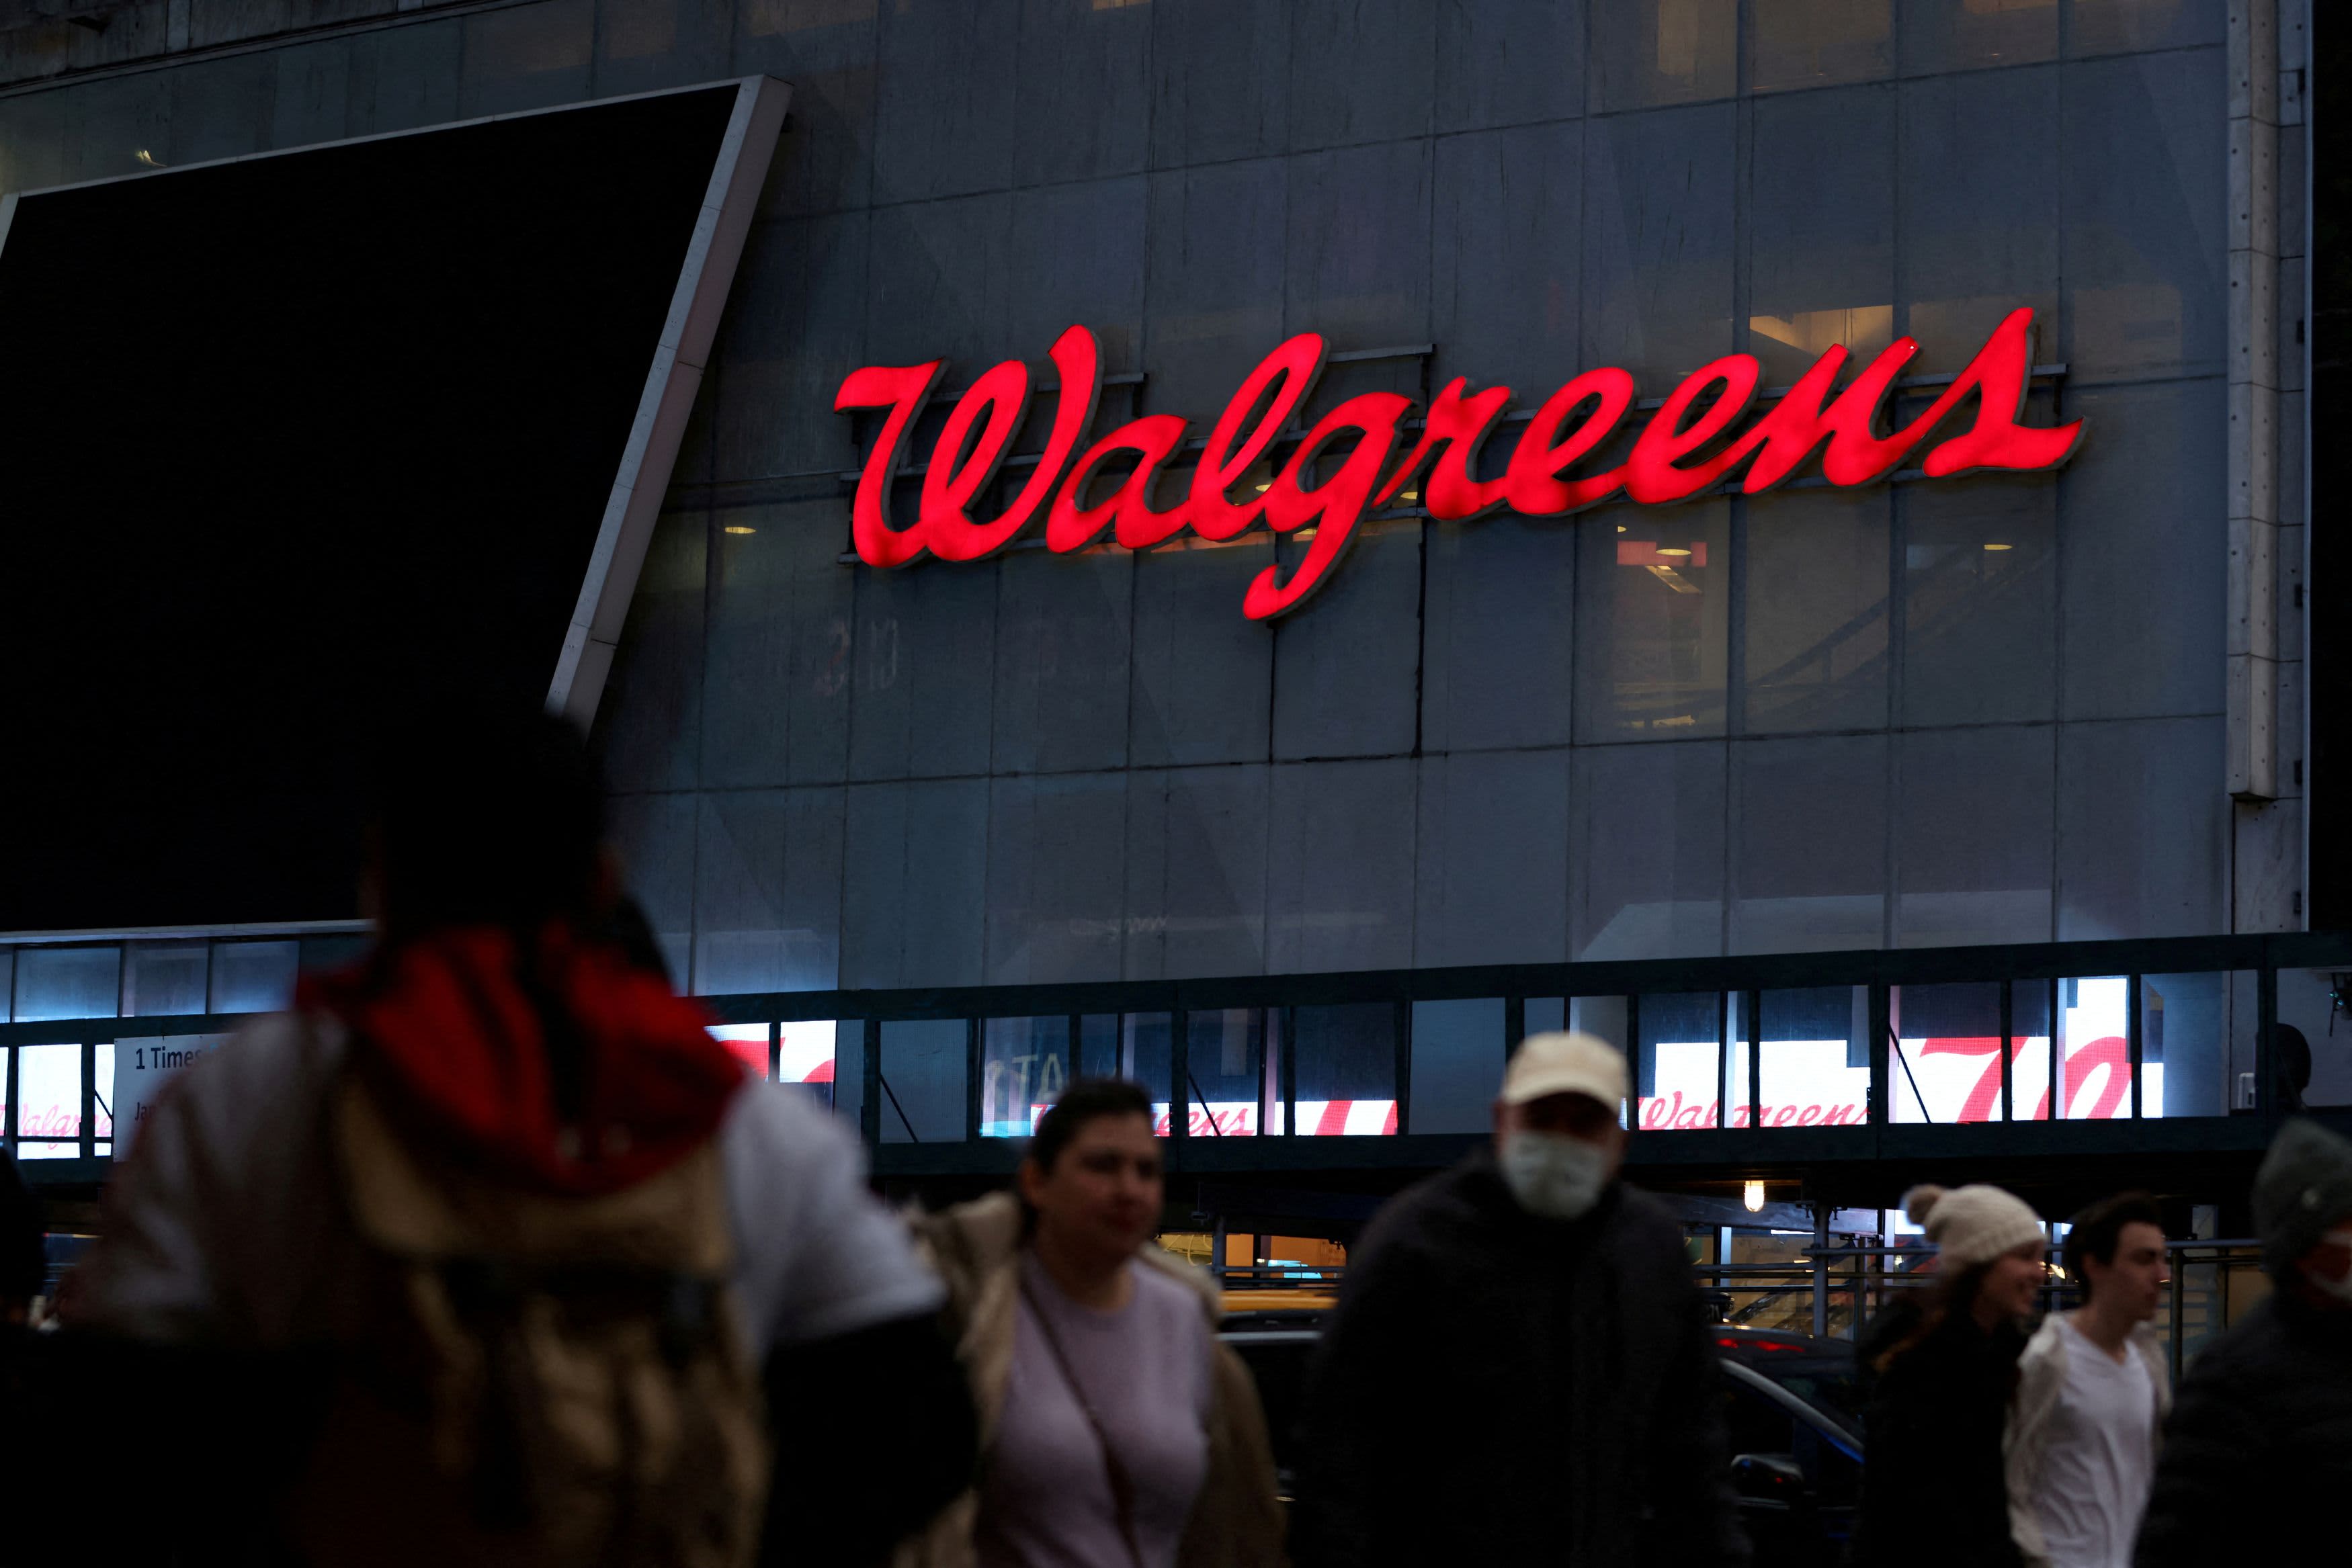 Buy Walgreens as it ramps up its health-care strategy, JPMorgan says in upgrade